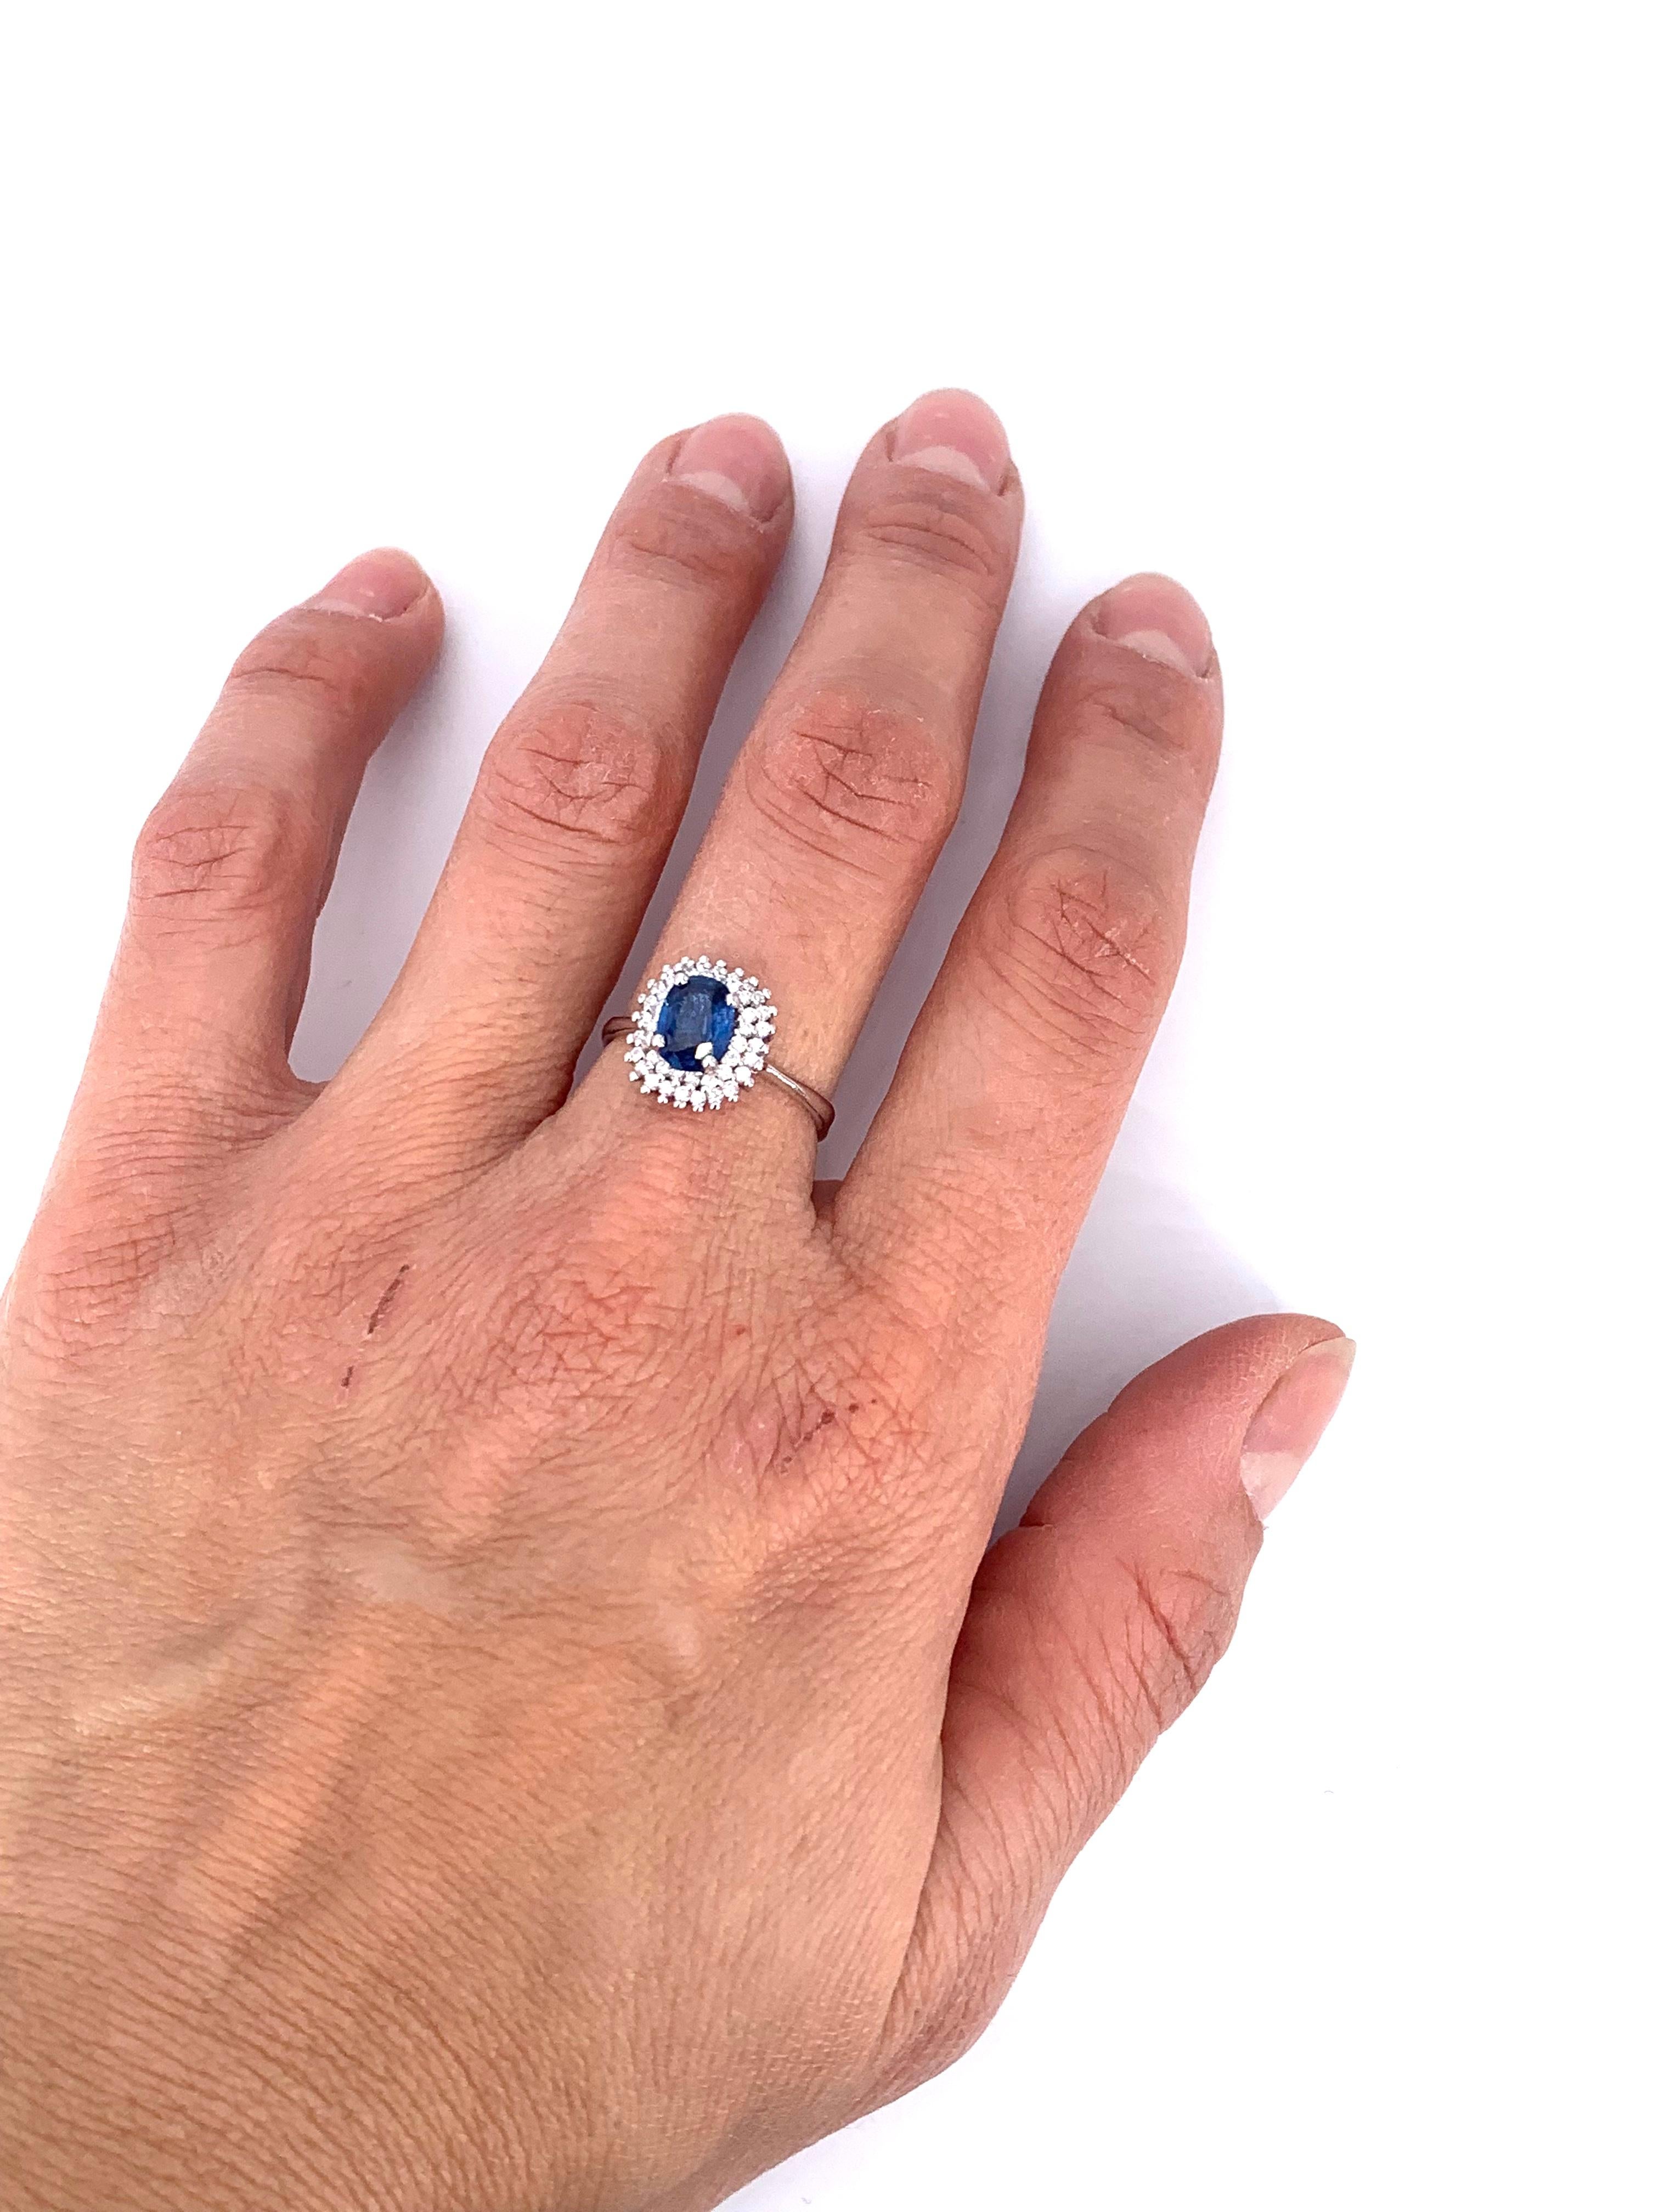 Contemporary Double Halo 1.12 Carat Sapphire & 0.34 Carat Diamond Cocktail Ring For Sale 2